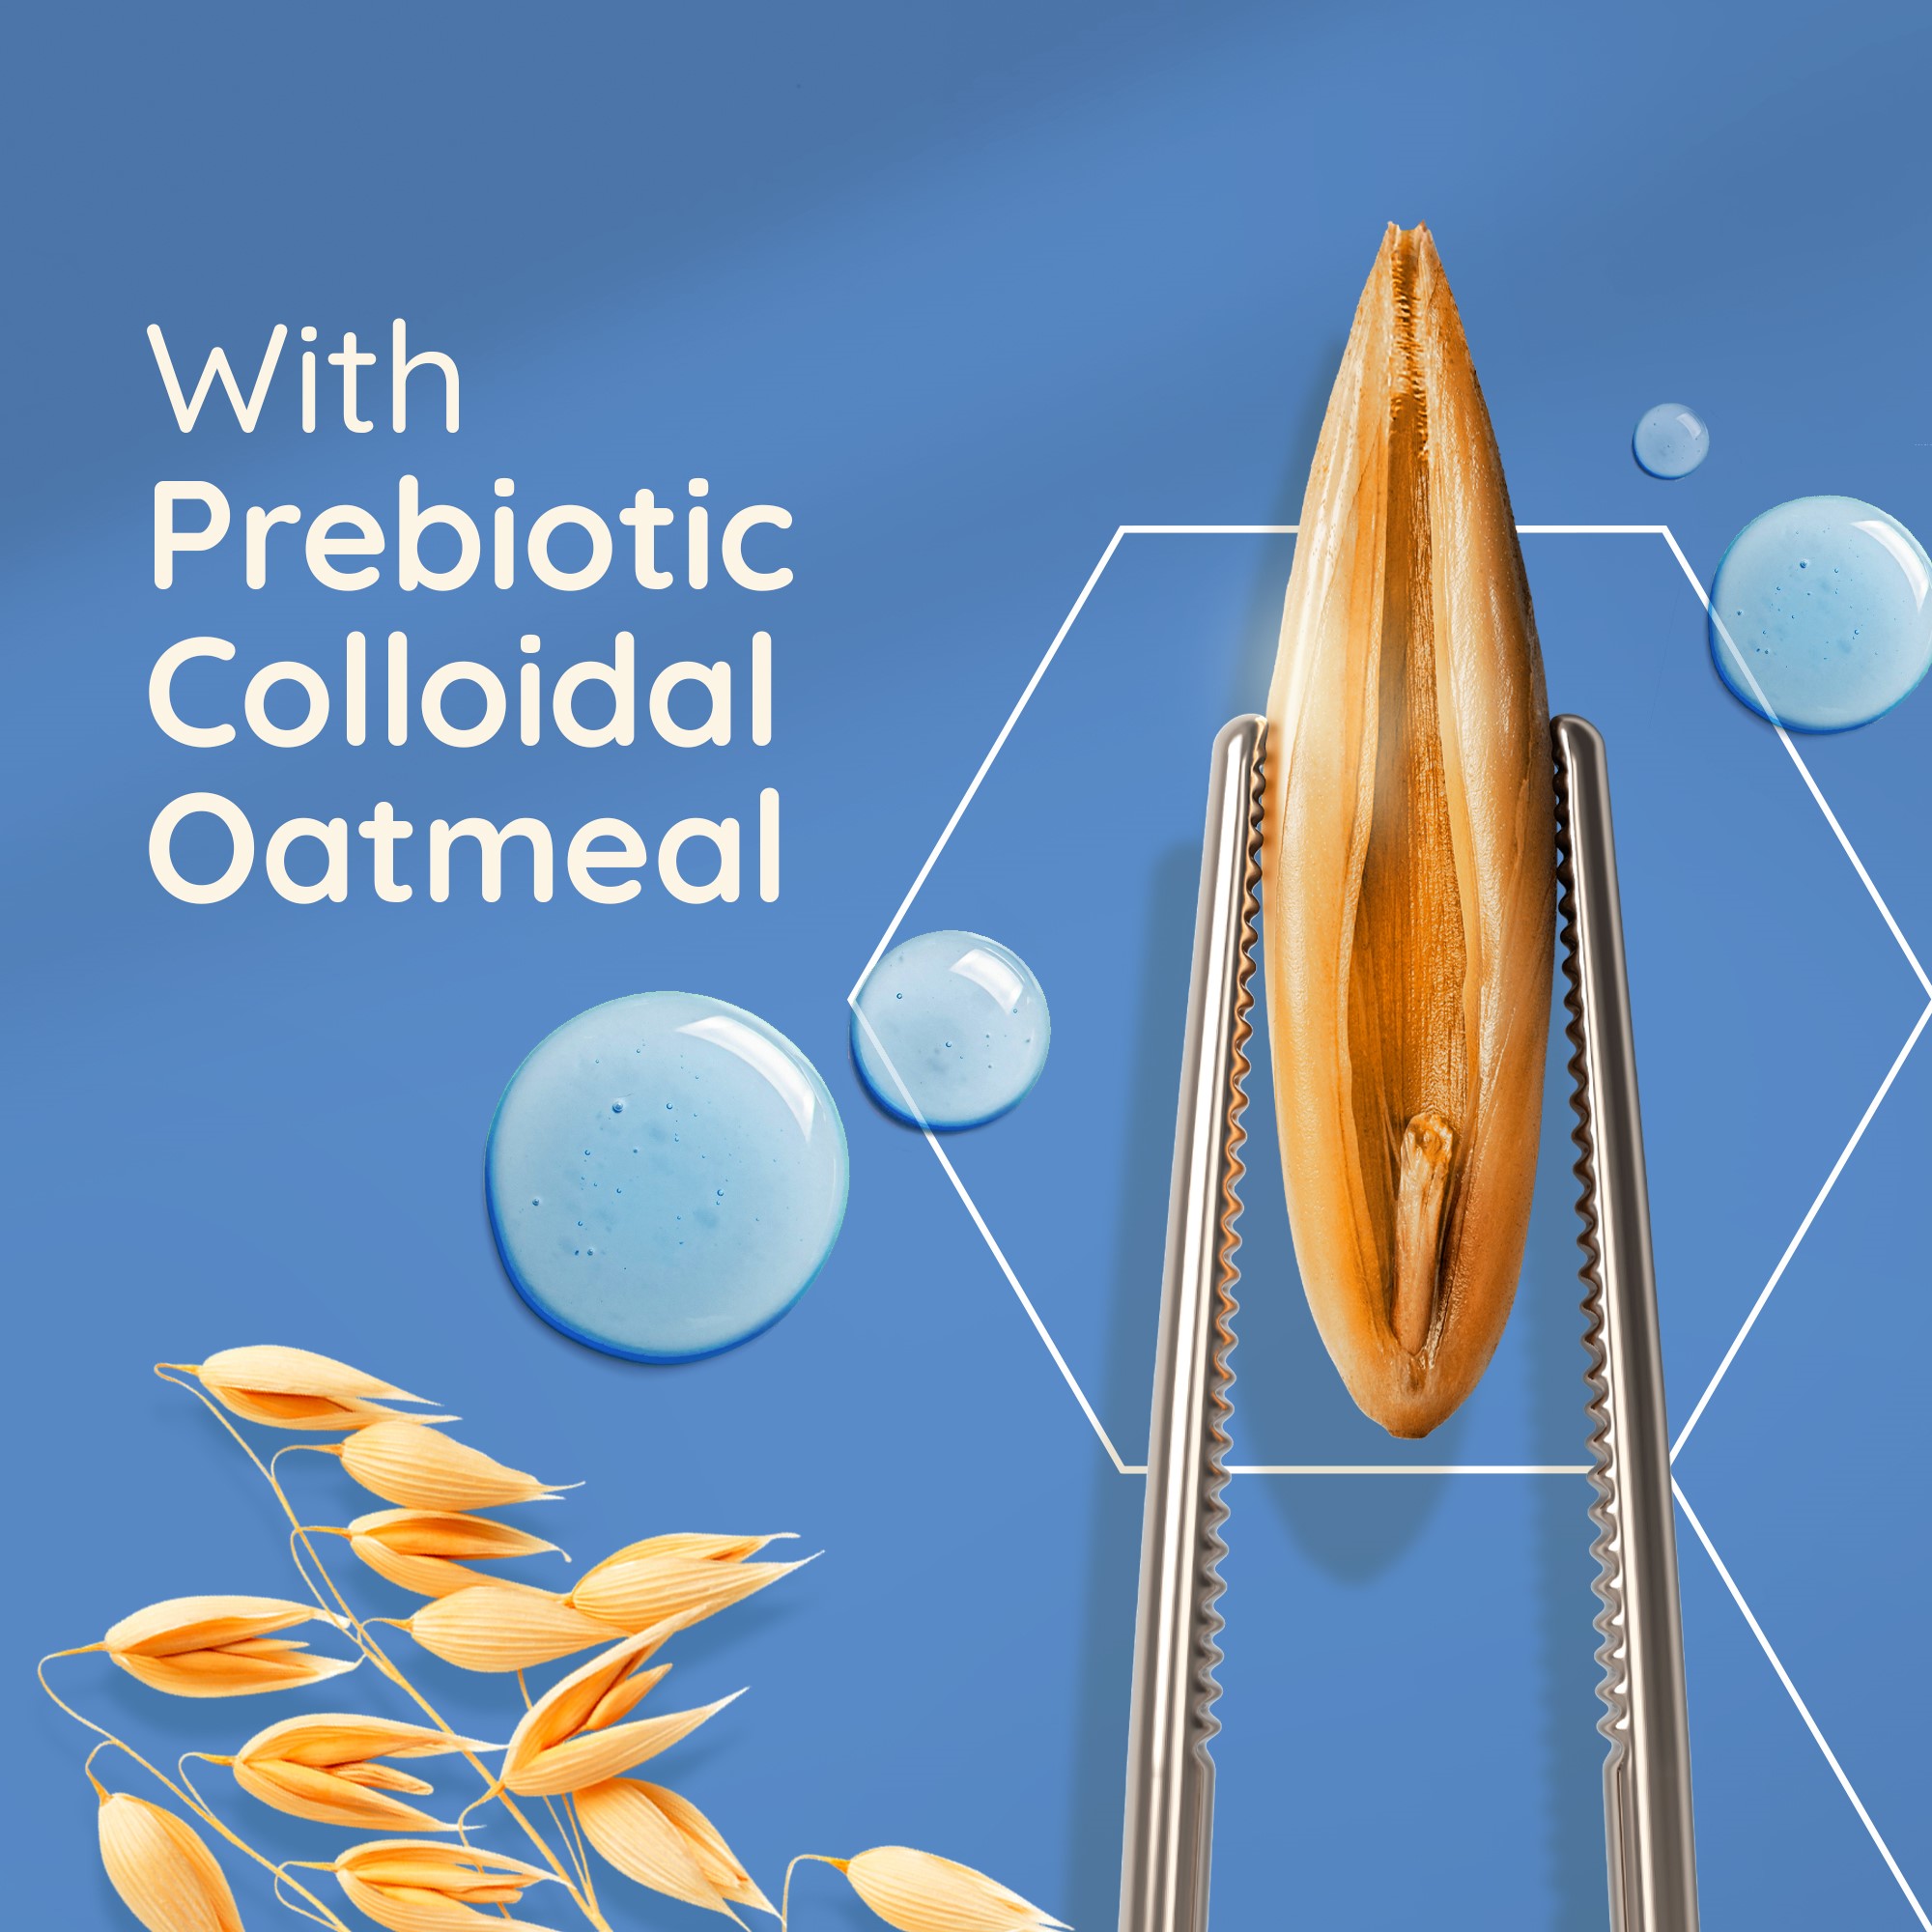 With prebiotic colloidal oatmeal